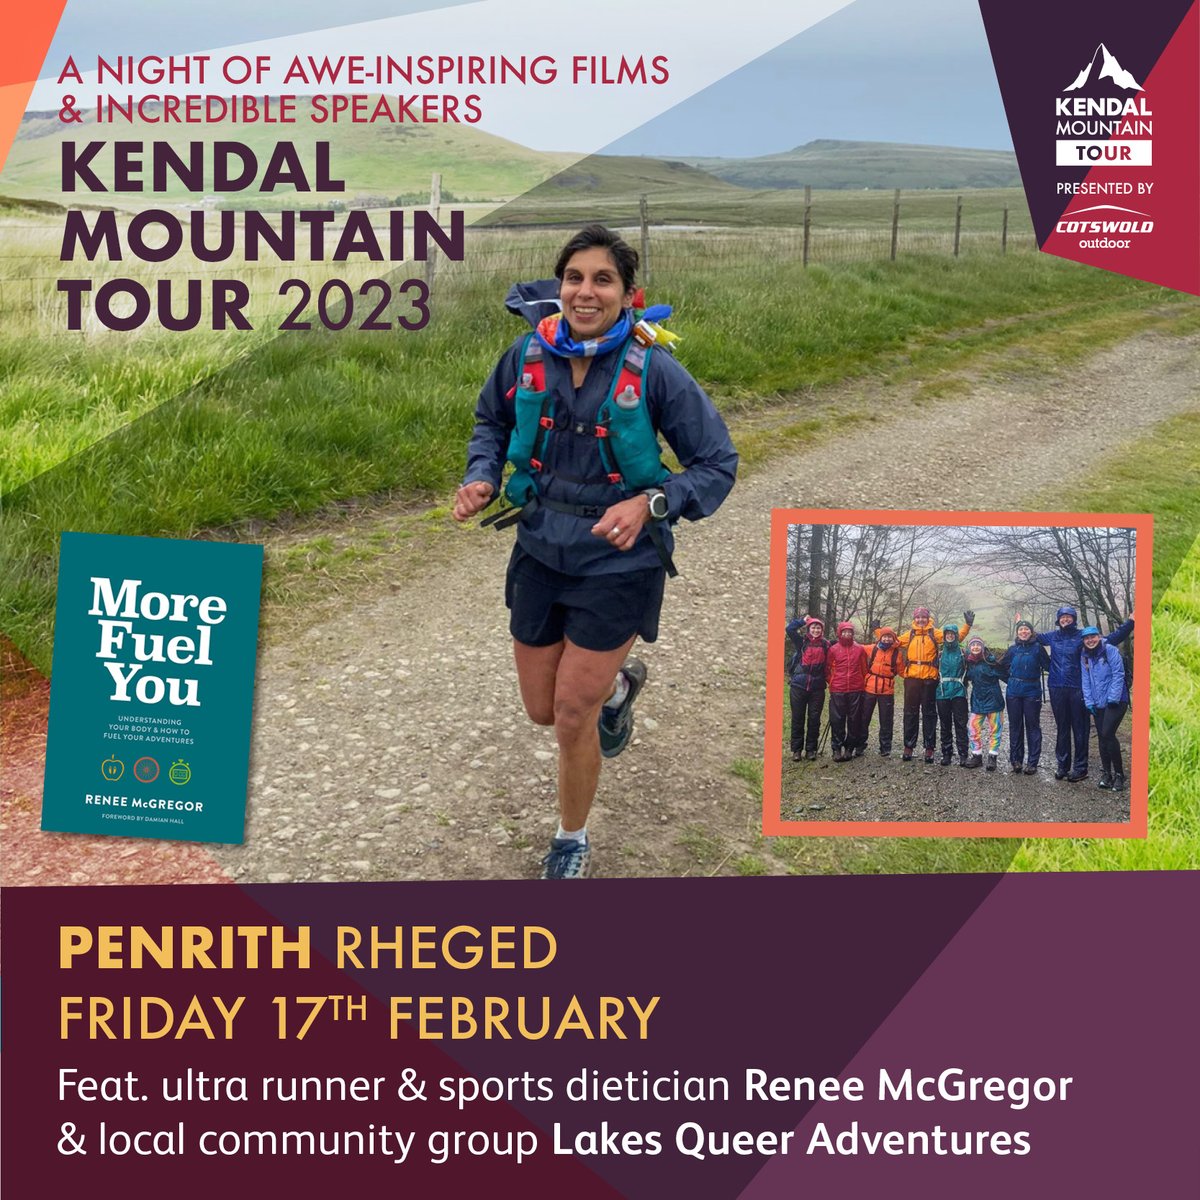 Tonight we kick off the tour in Kendal 💥 and it's totally sold out! But there are a handful of tickets available to hear from the fantastic @mcgregor_renee in @RhegedCentre in Penrith tomorrow rheged.com/event/kendal-m… #penrith #sharetheadventure